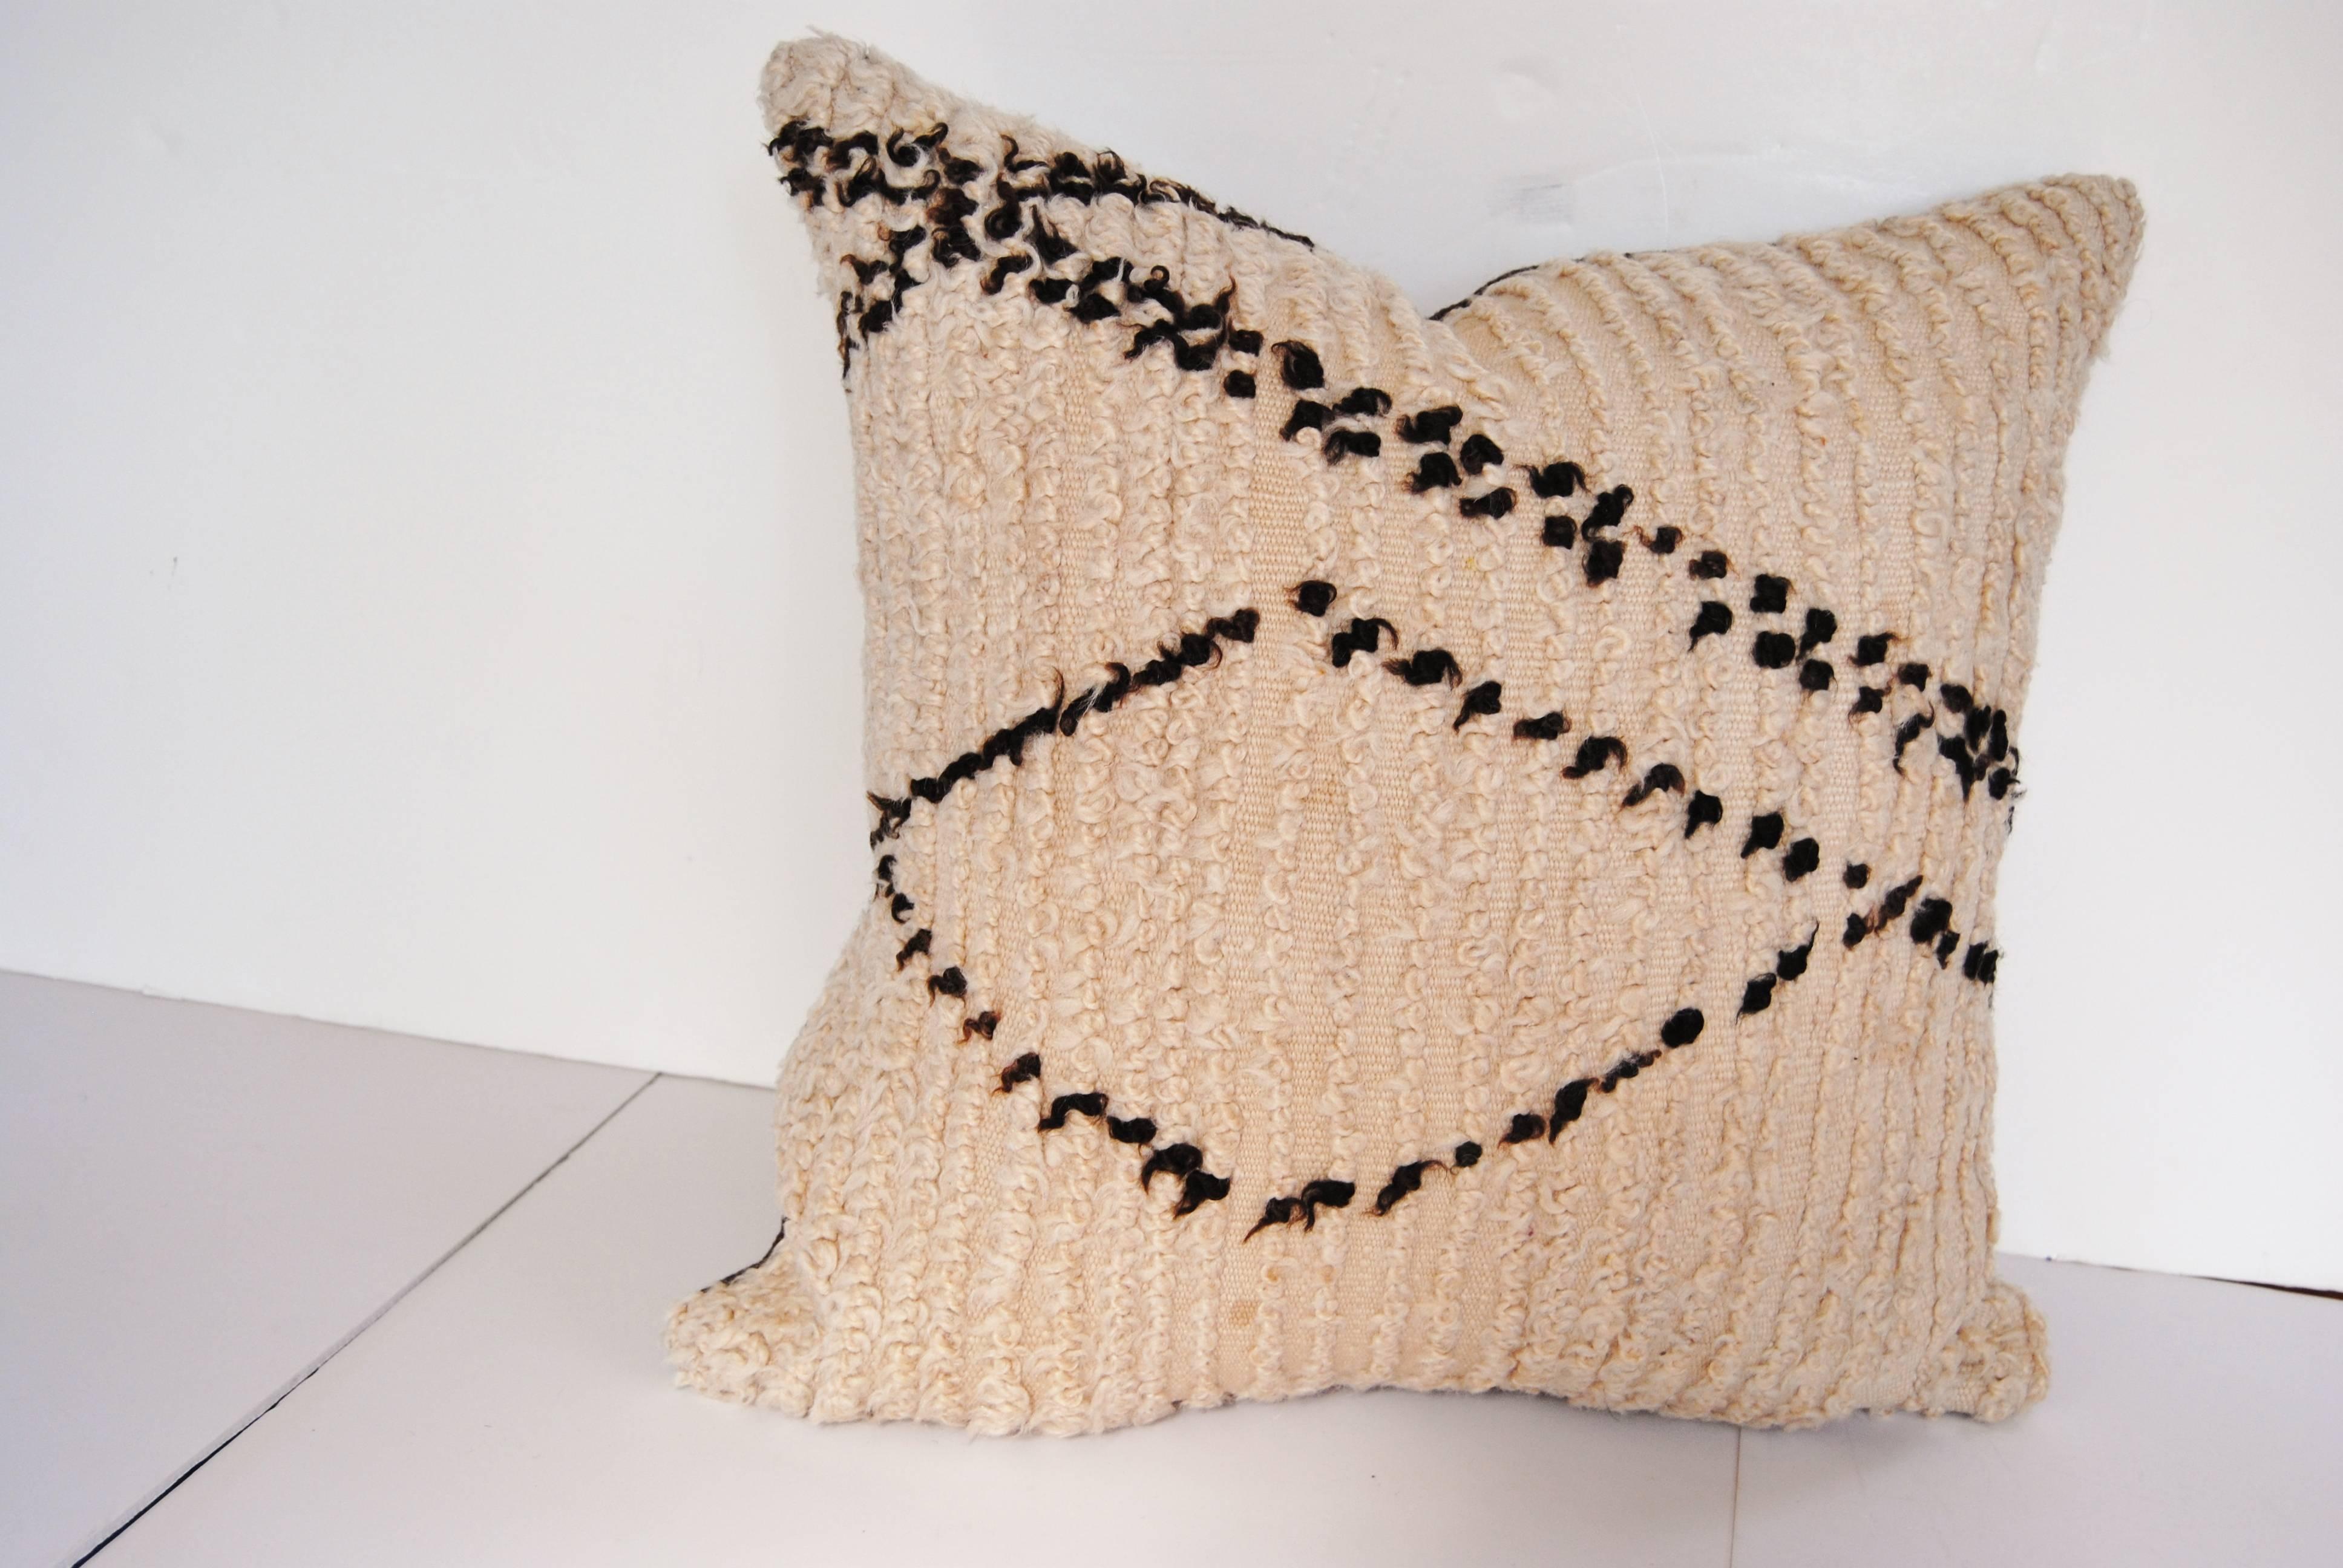 Custom pillow cut from a vintage hand loomed wool beni ouarain Moroccan rug from the Atlas Mountains.  Wool is soft and lustrous with all natural color.  Pillow is backed in dark brown linen, filled with an insert of 50/50 down and feathers and hand